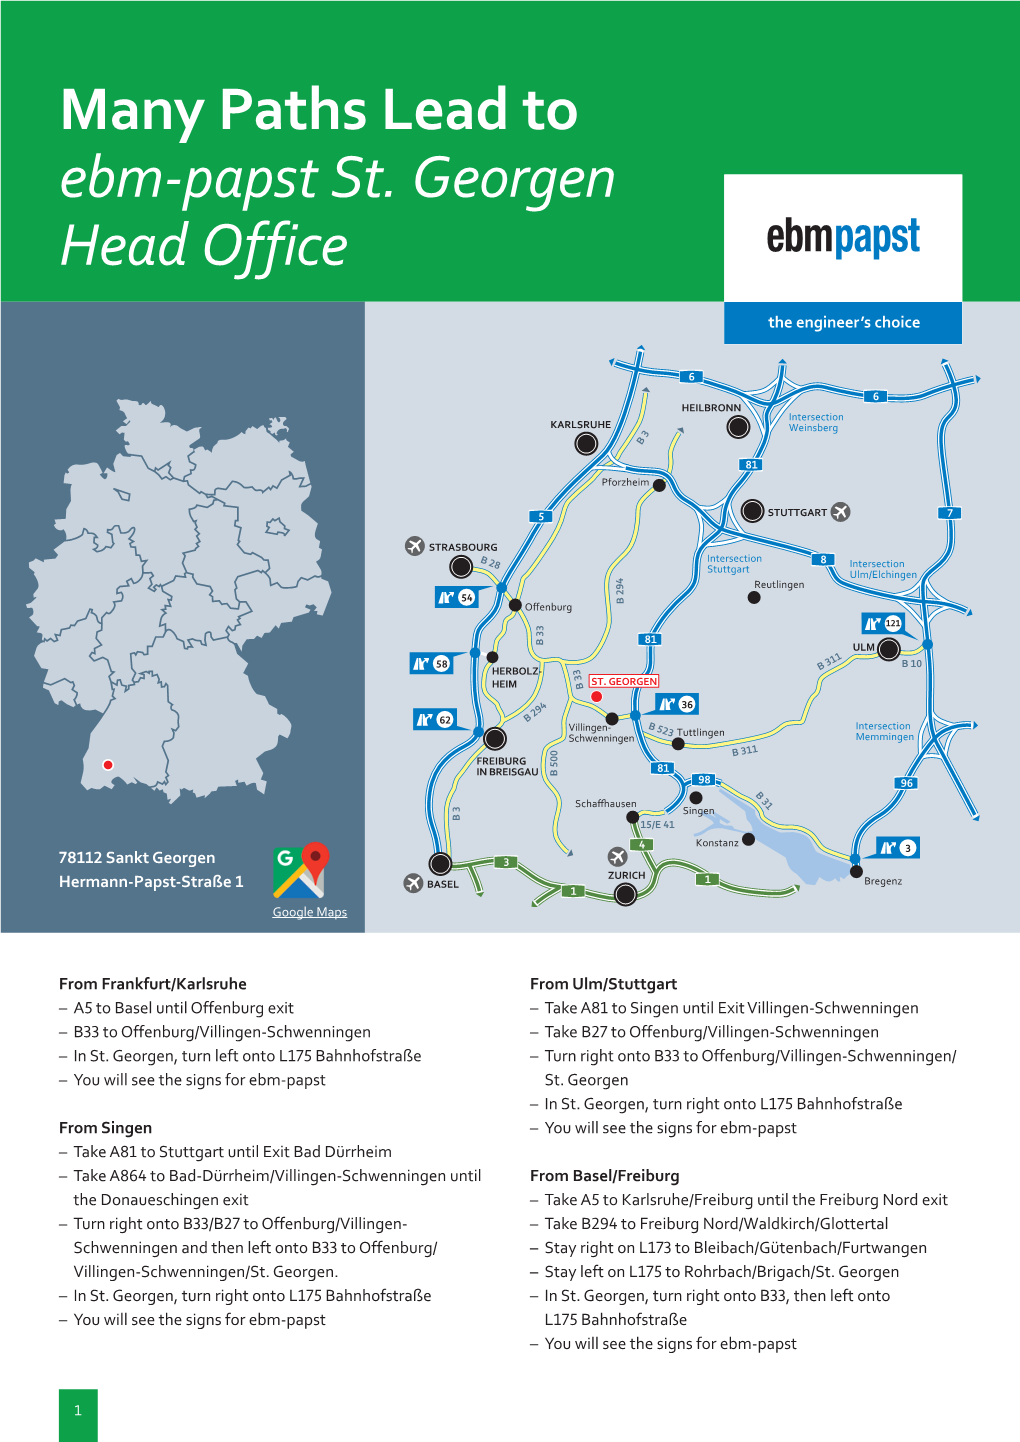 How to Get to Ebm-Papst in St. Georgen Head Office